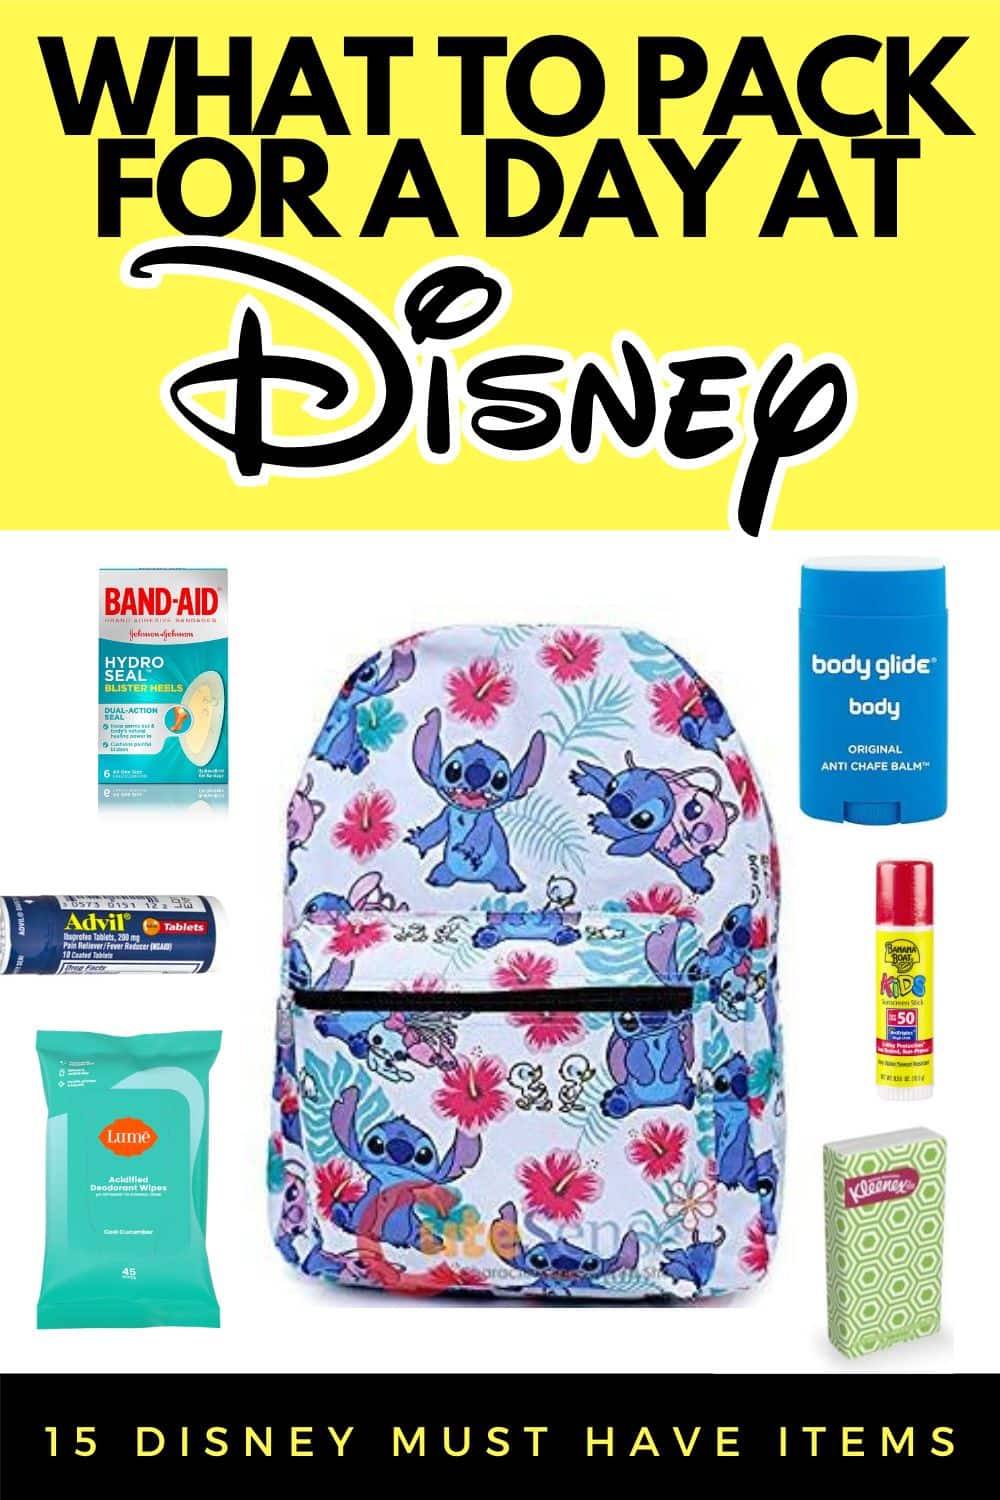 What to Pack for a Day at Disney: 15 Disney Must-Have Items